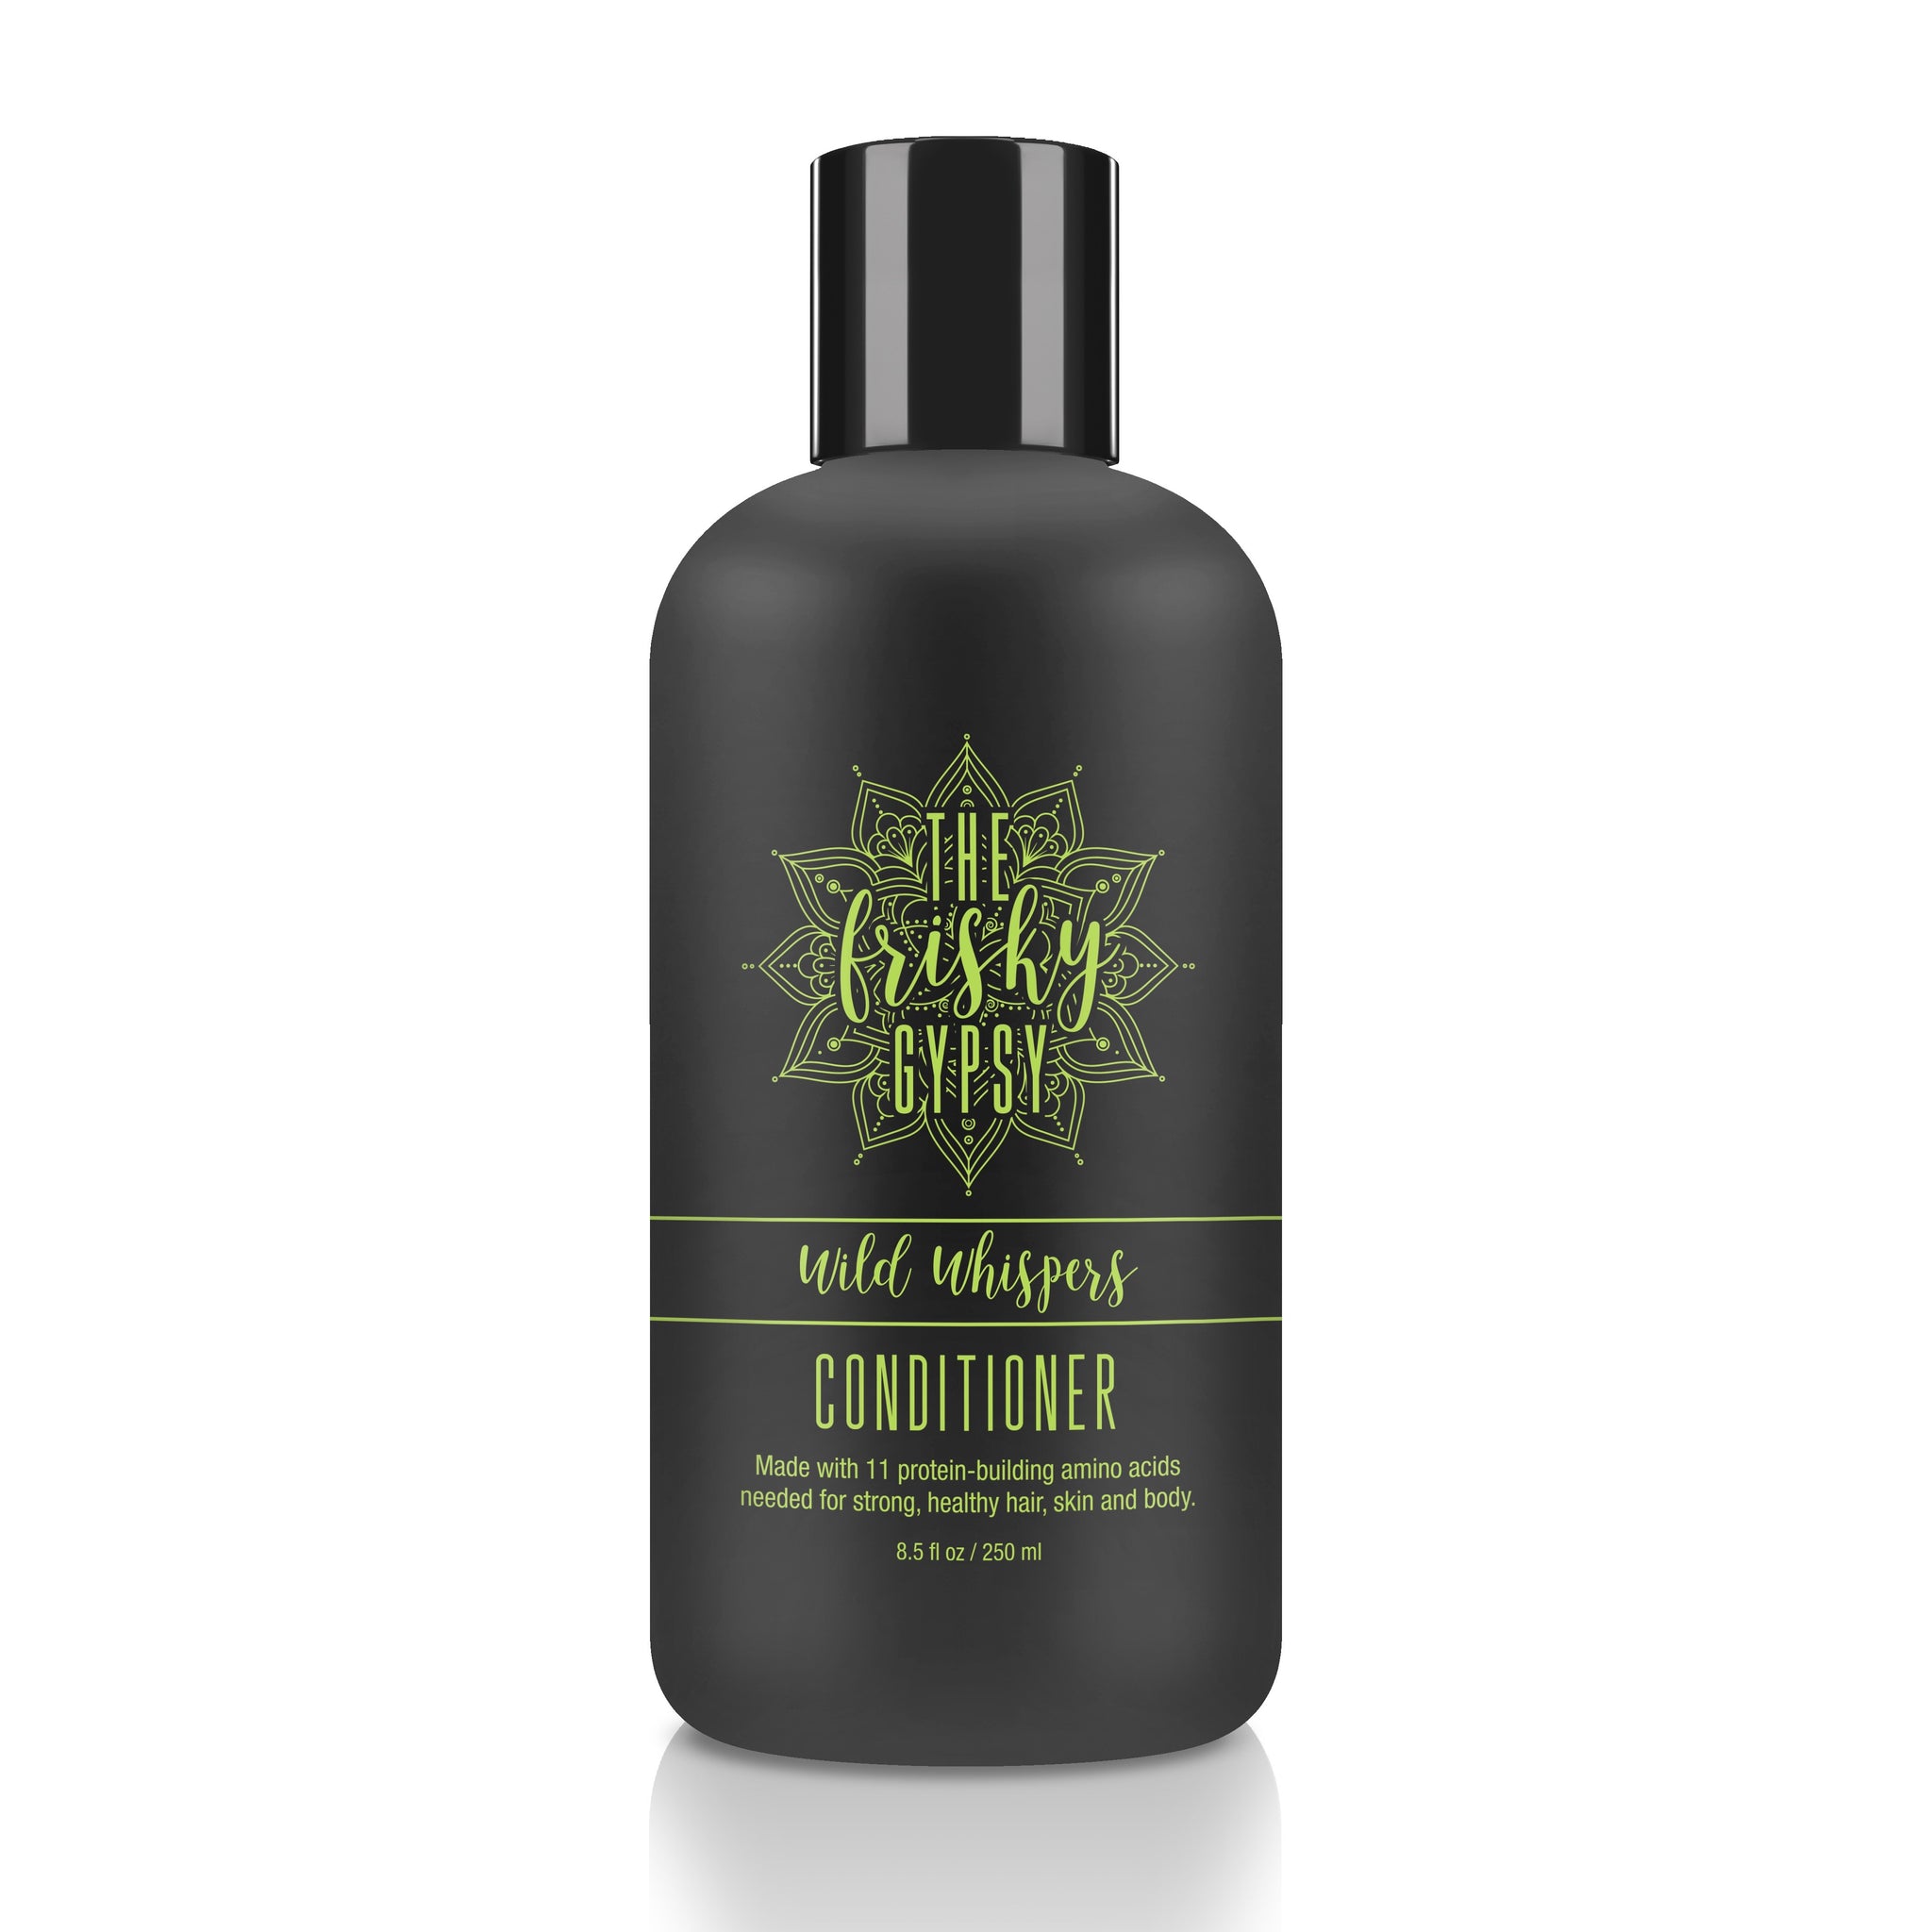 Wild Whispers Conditioner